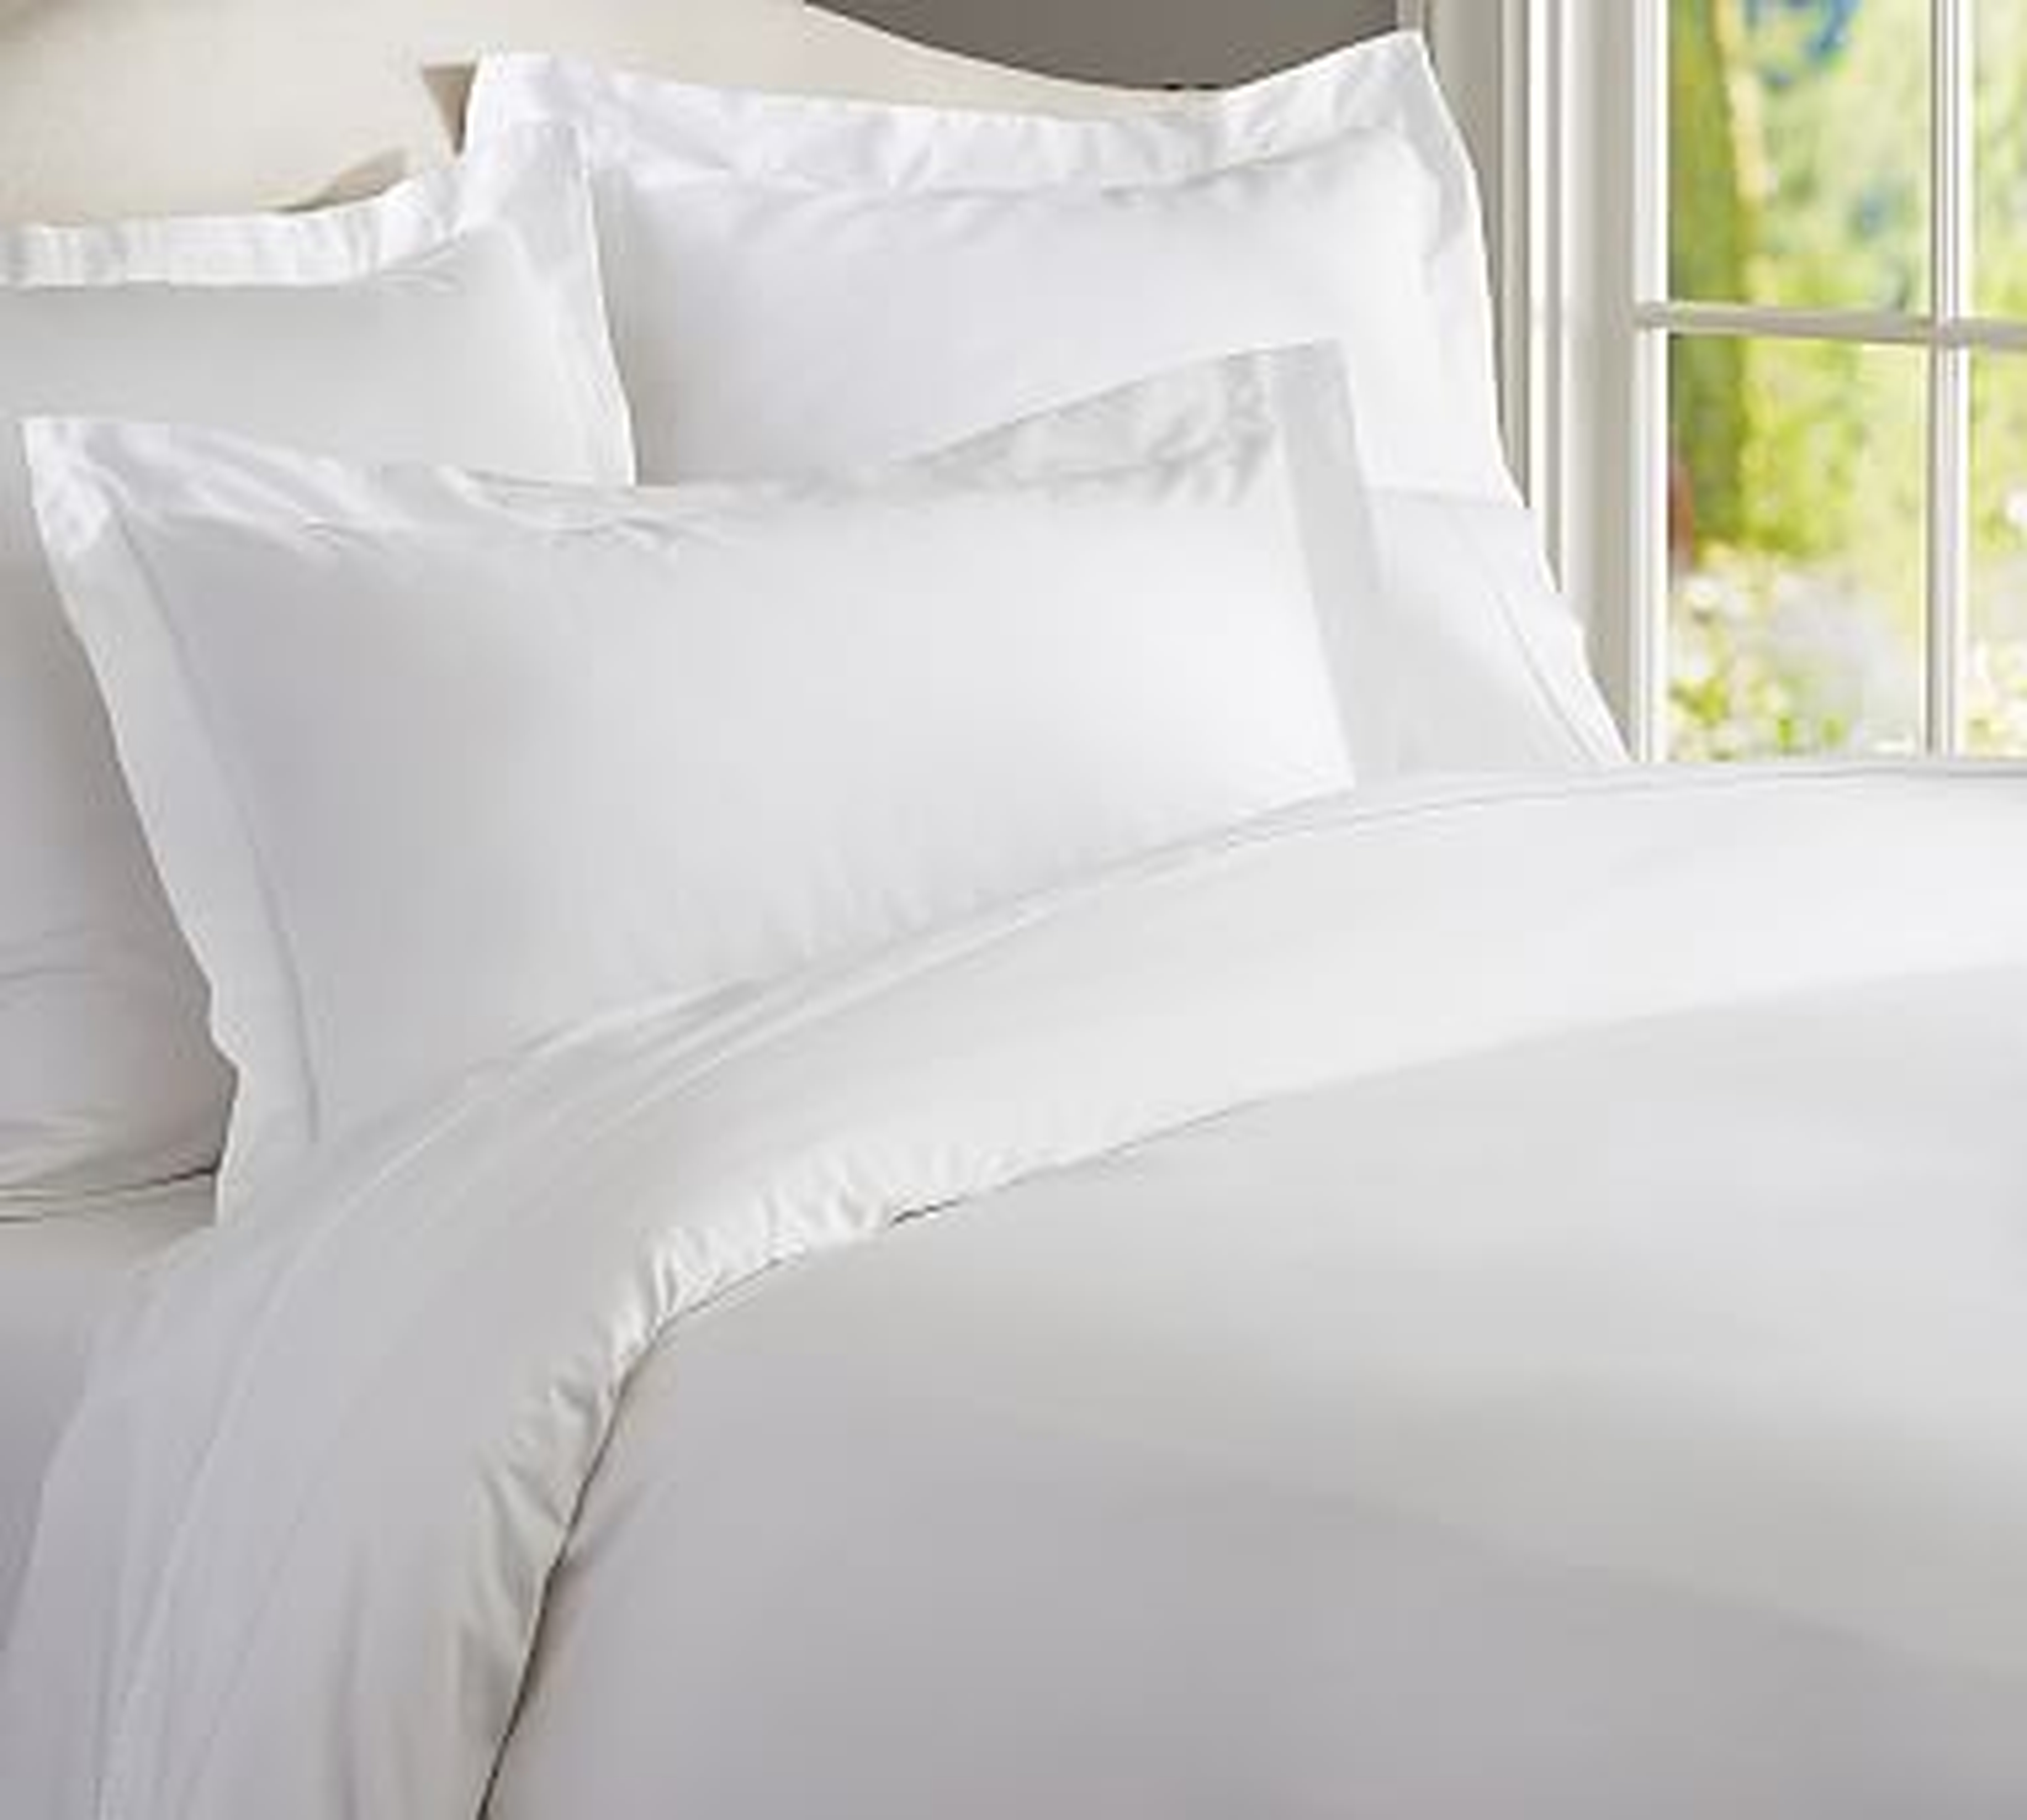 PB Essential 300-Thread-Count Sateen Bedding Bundle, Queen, White - Pottery Barn